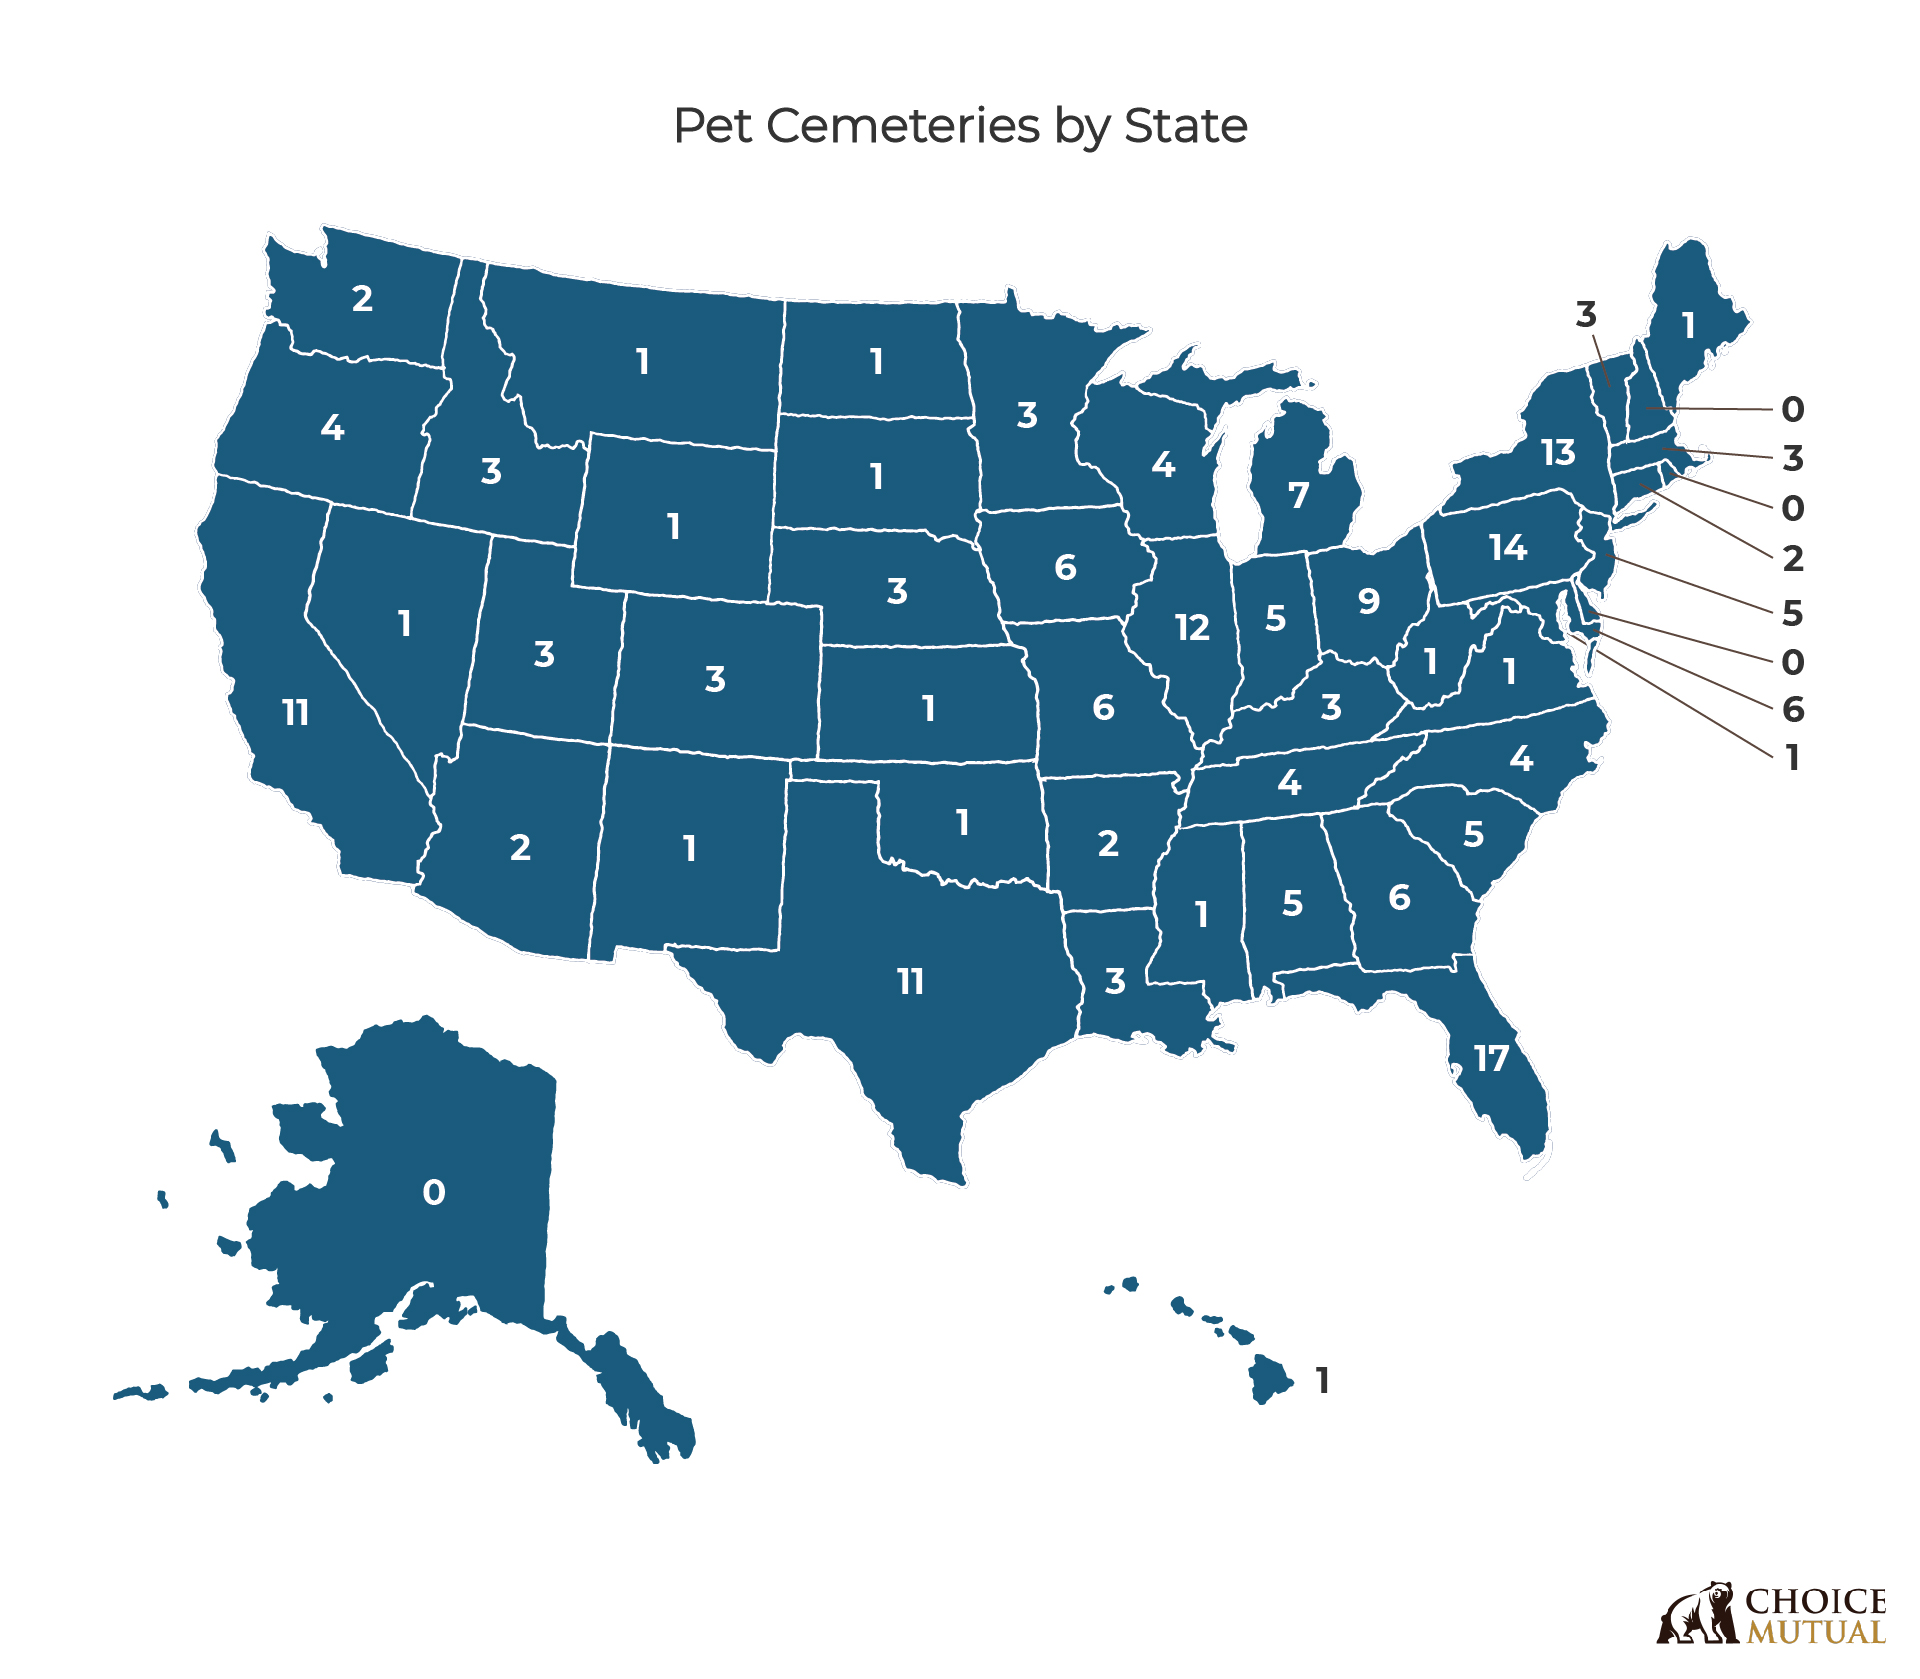 A map showing the number of pet cemetaries in each state